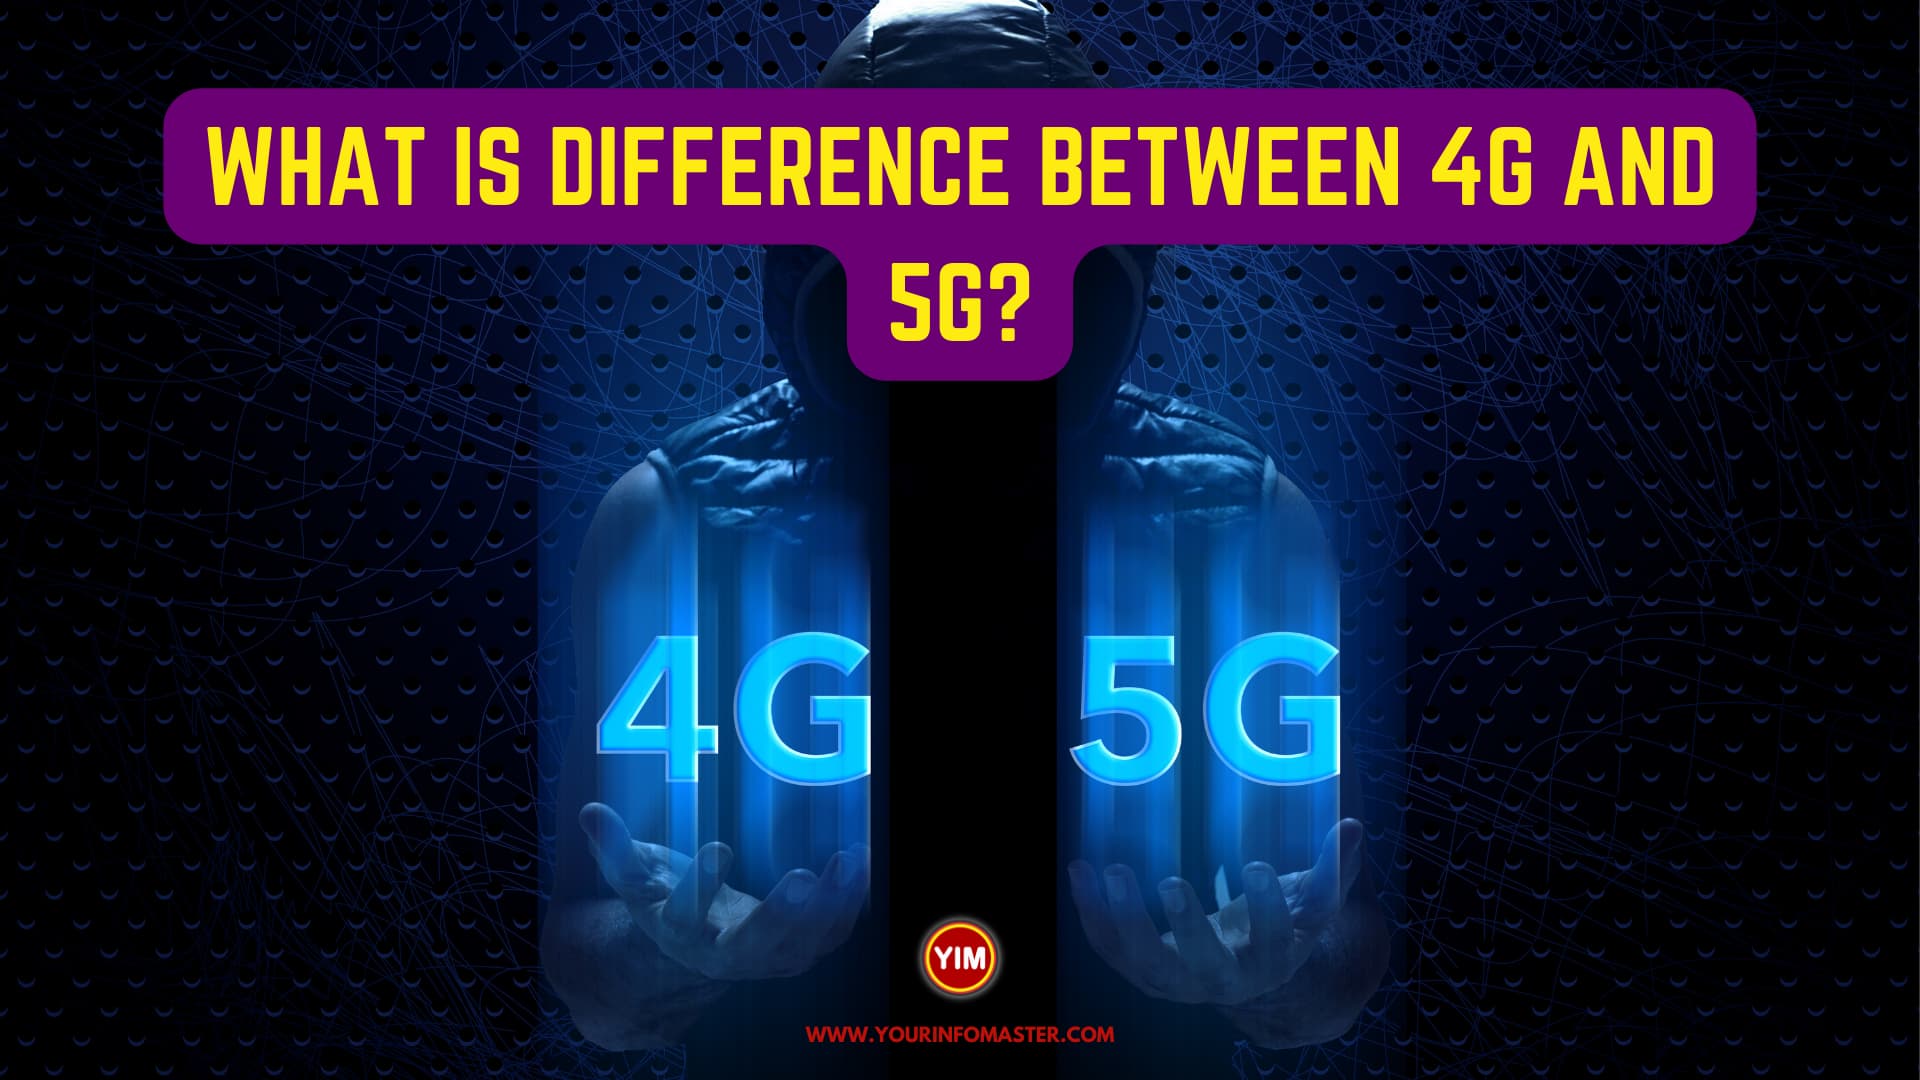 What is difference between 4G and 5G